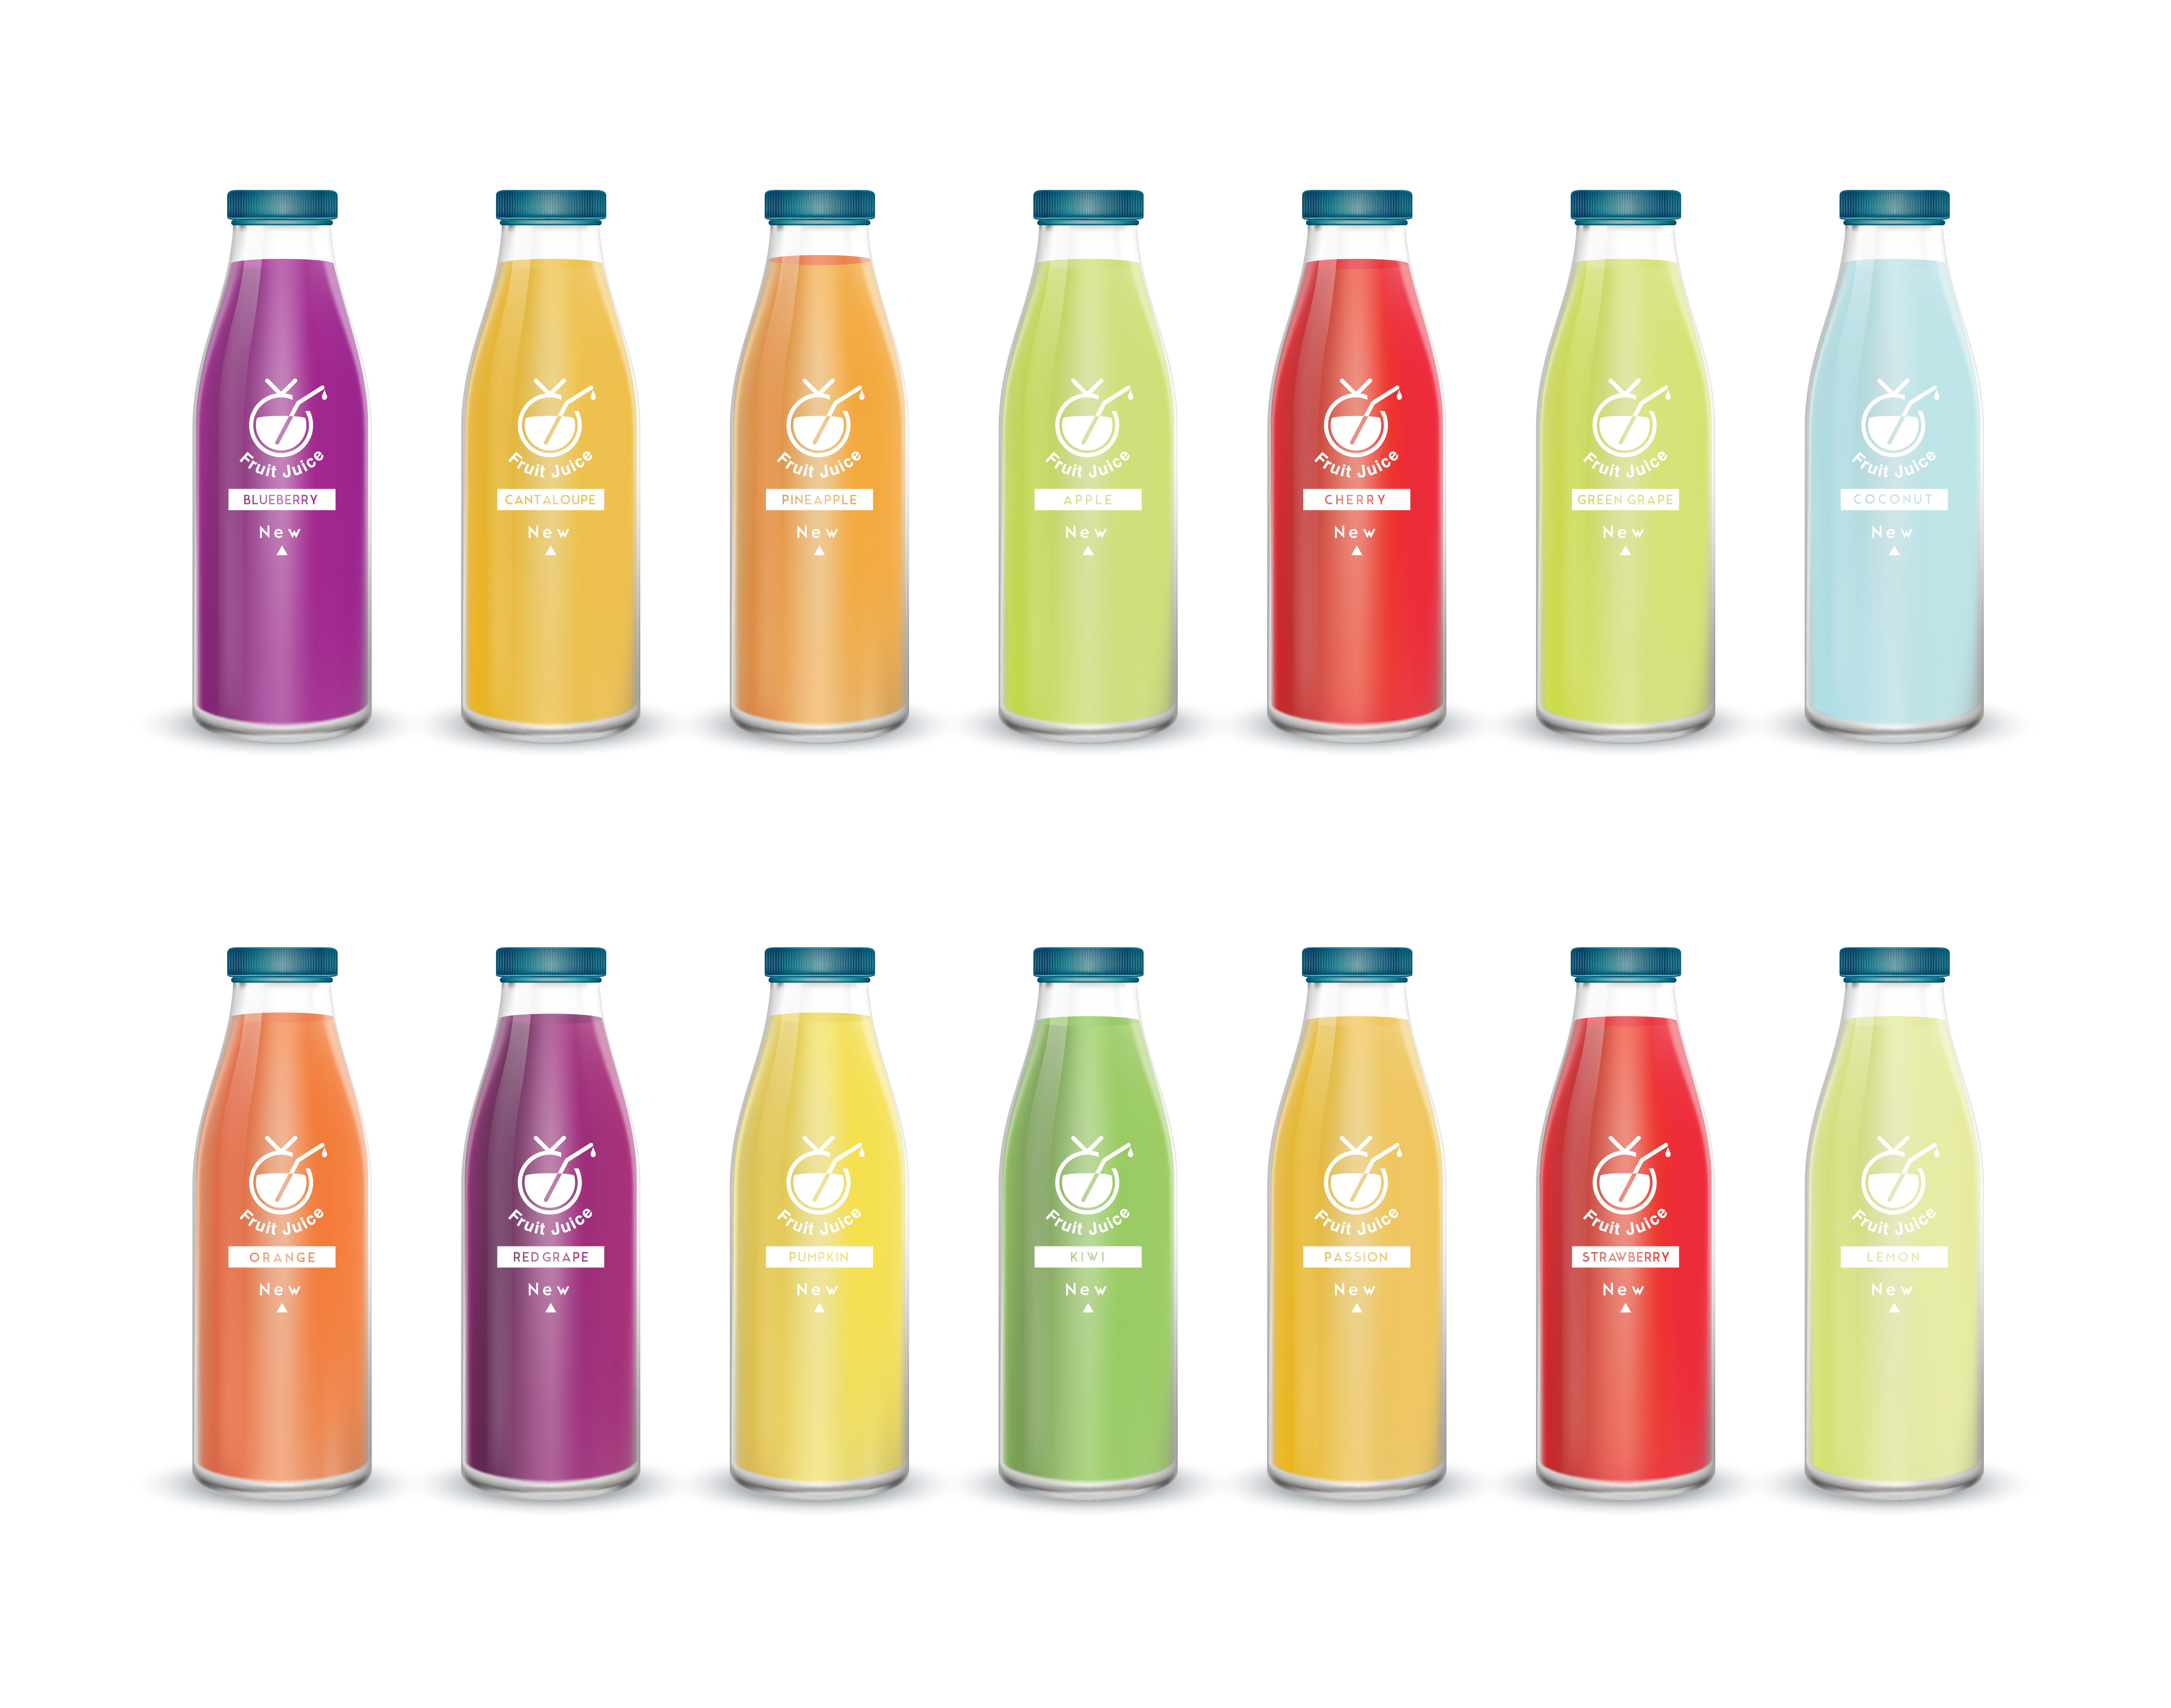 https://static.vecteezy.com/system/resources/previews/001/392/060/original/set-of-glass-bottles-with-different-fruit-juices-vector.jpg